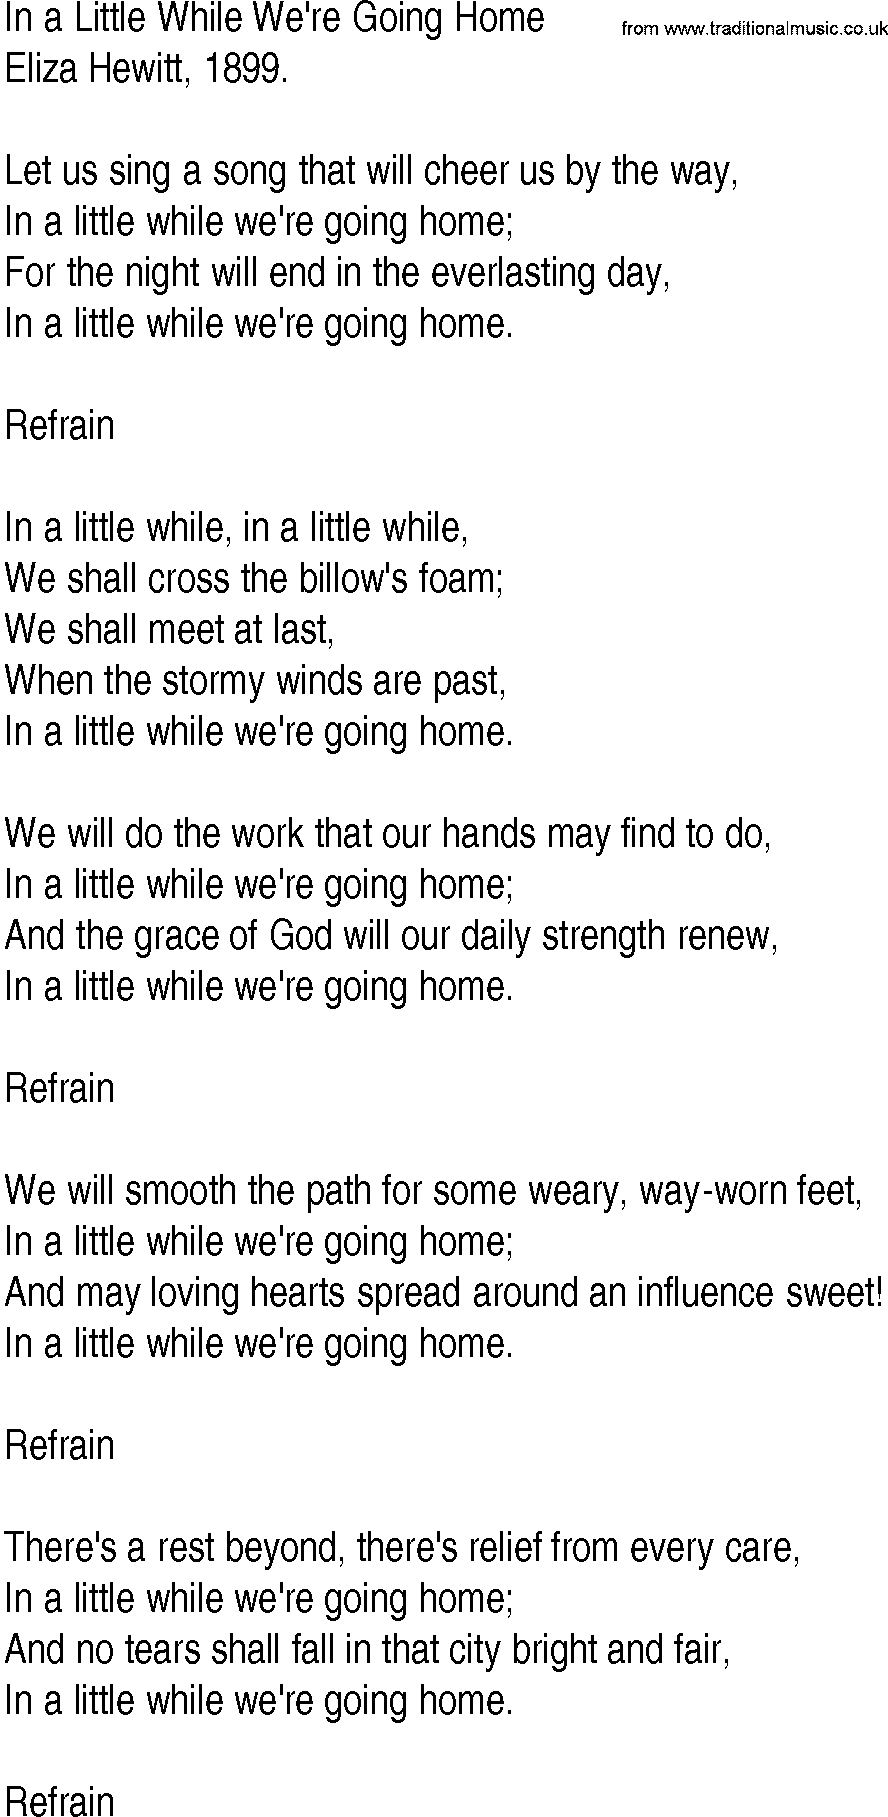 Hymn and Gospel Song: In a Little While We're Going Home by Eliza Hewitt lyrics